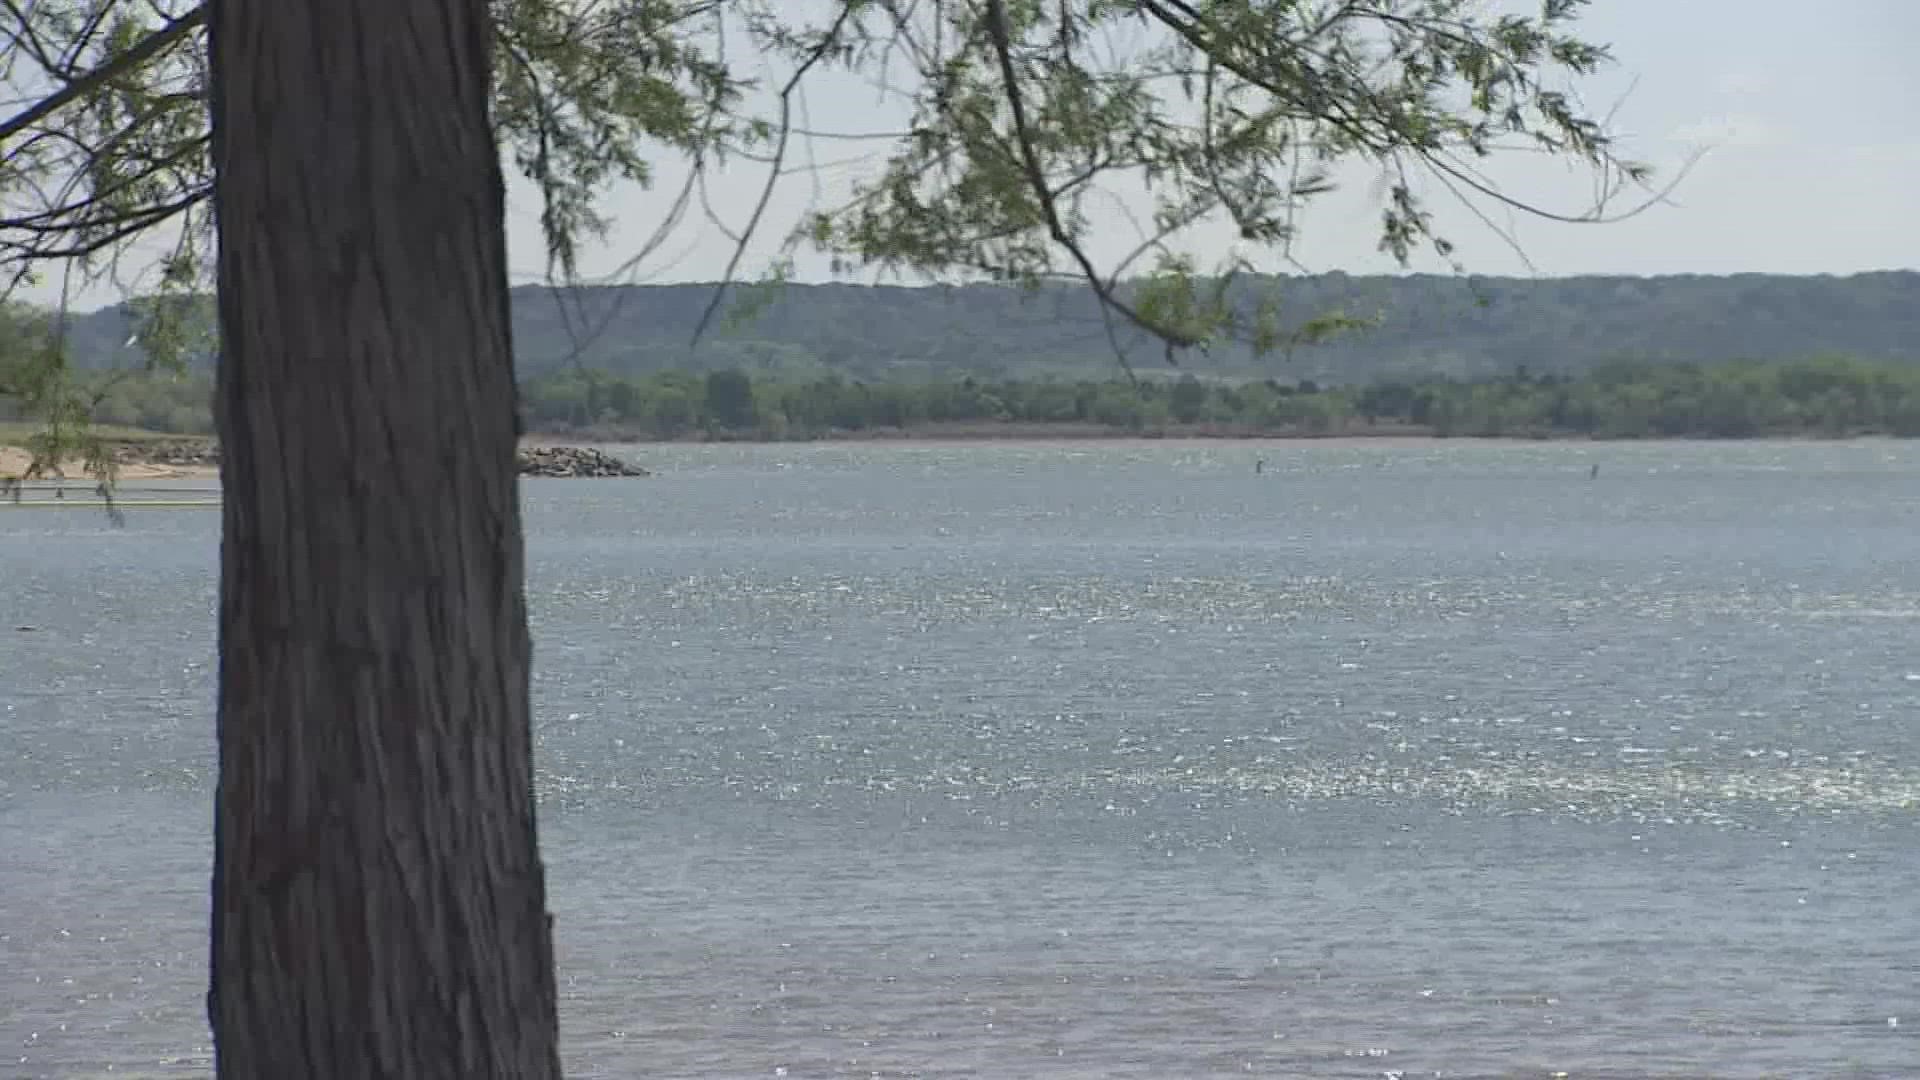 Any child who’s been submerged in water and has to go to the hospital for treatment is considered a "drowning," according to Cook Children’s.